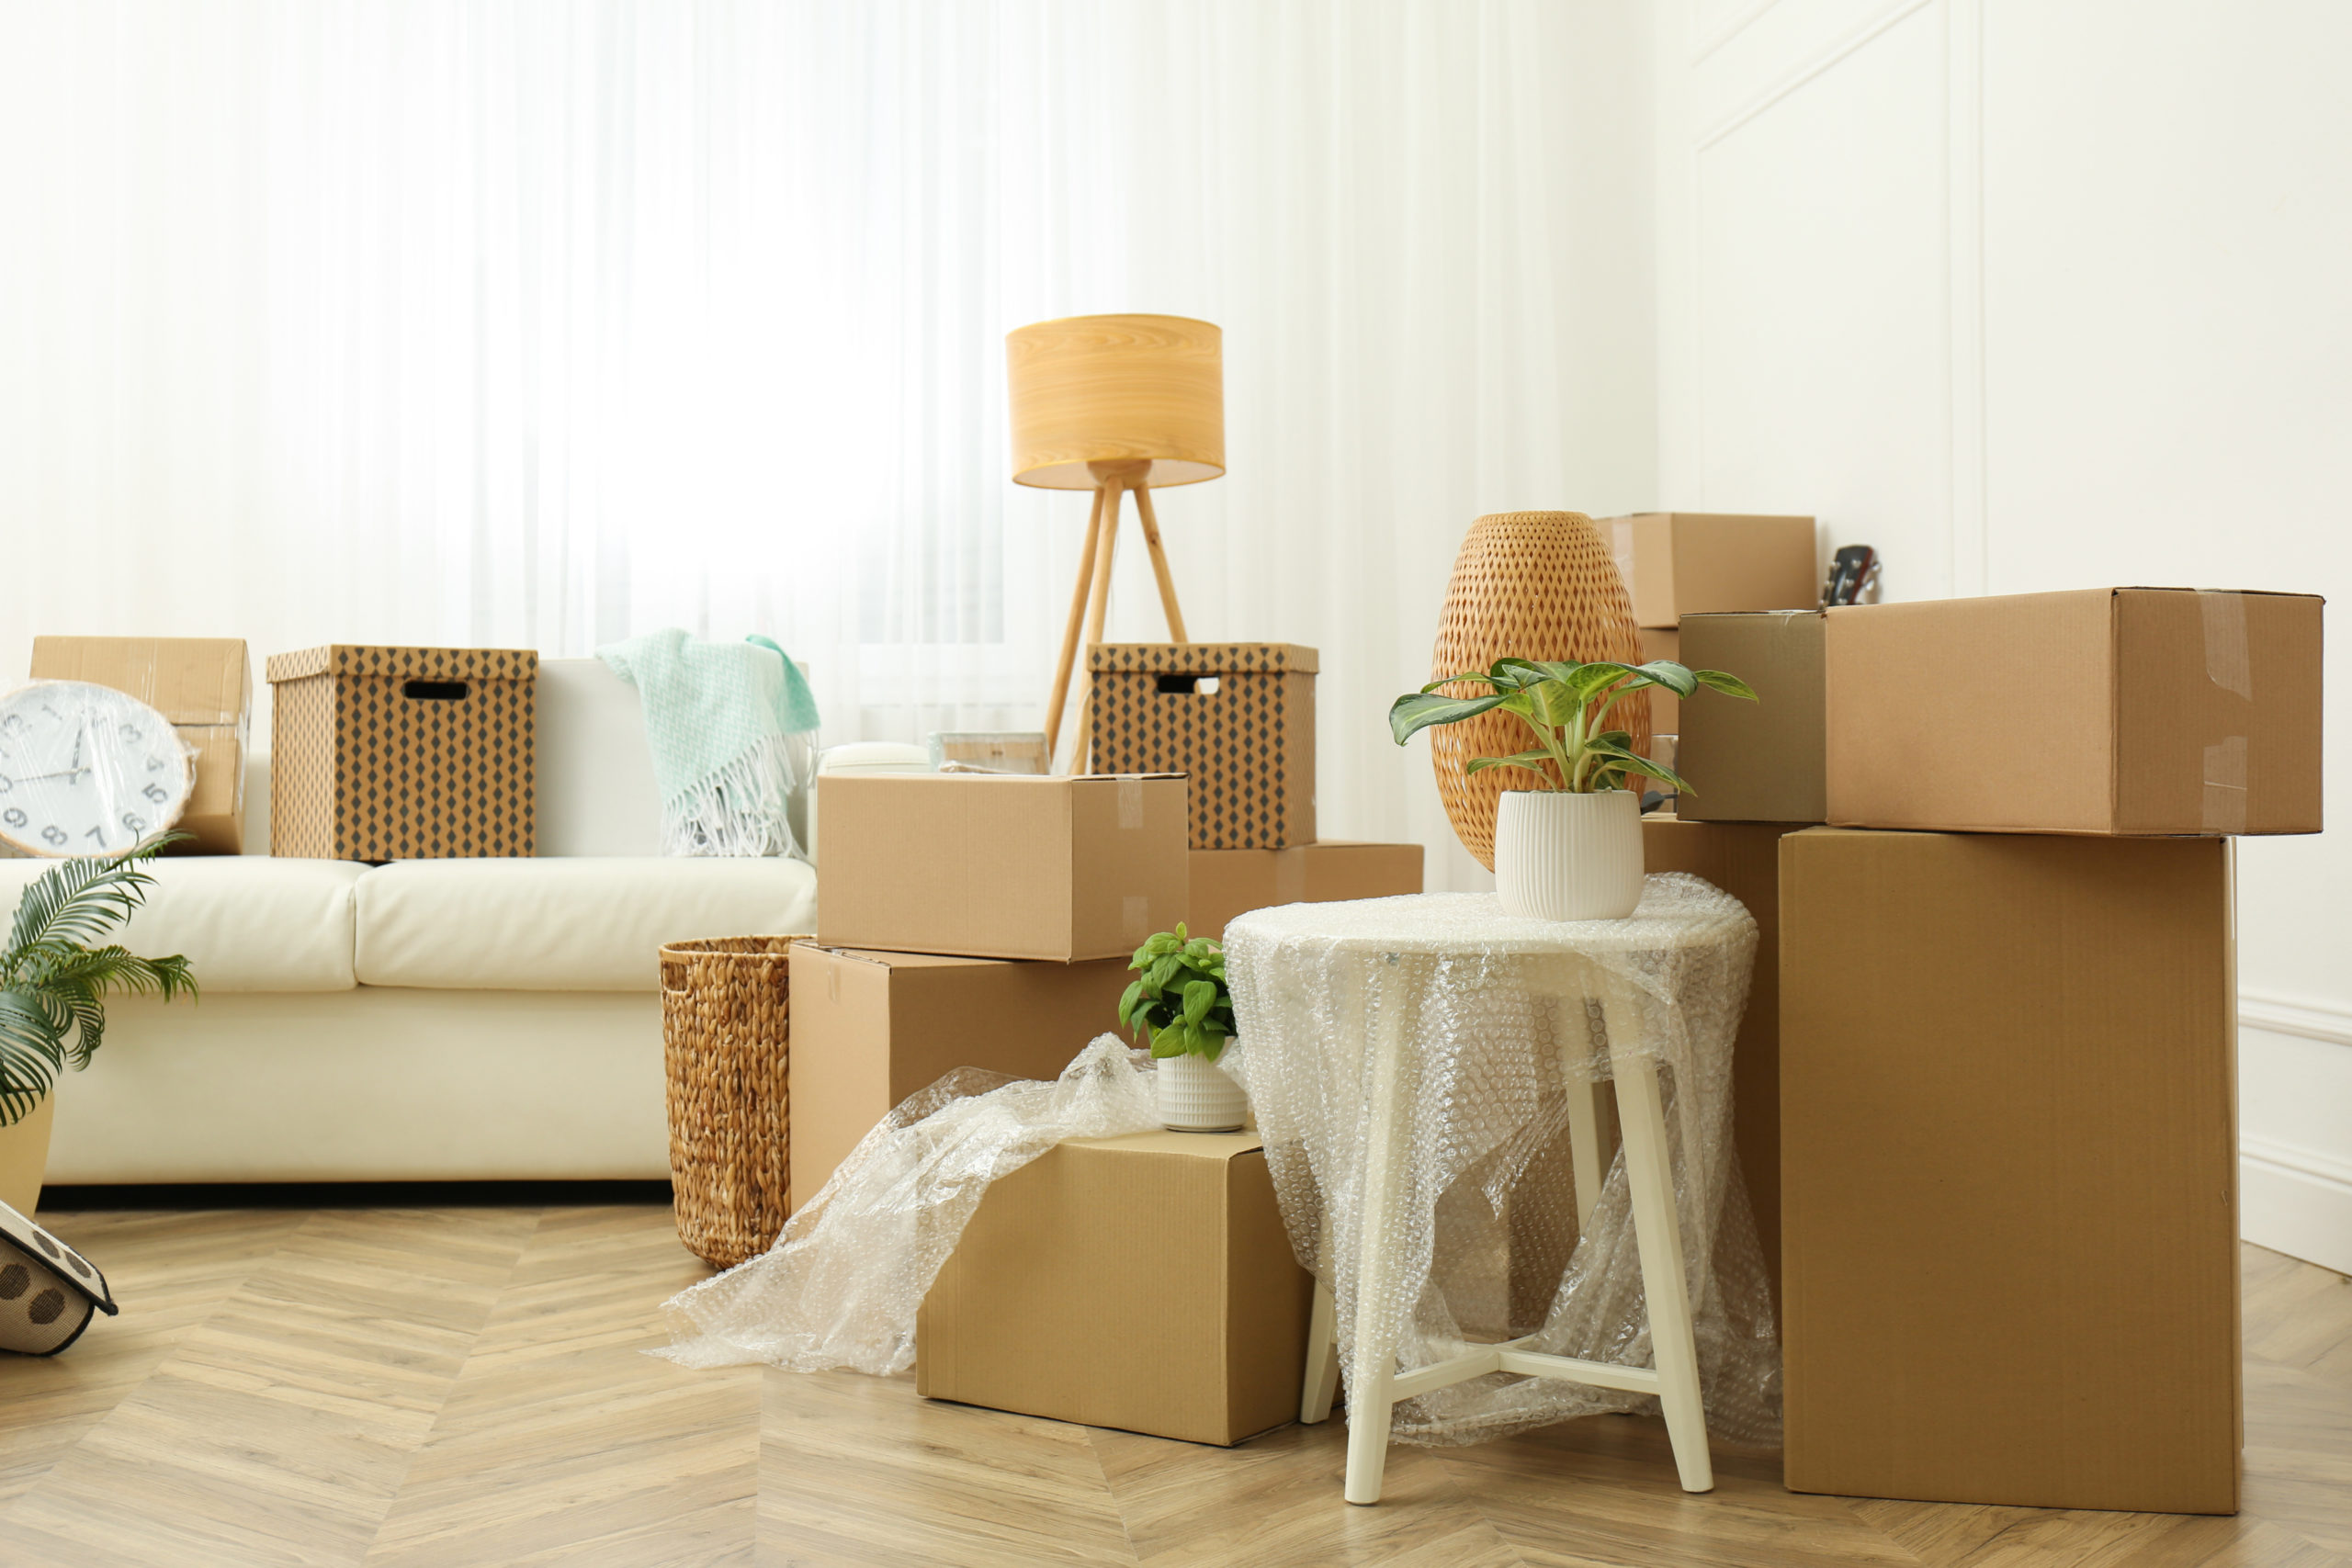 St. Augustine Independent Living: Tips for Downsizing